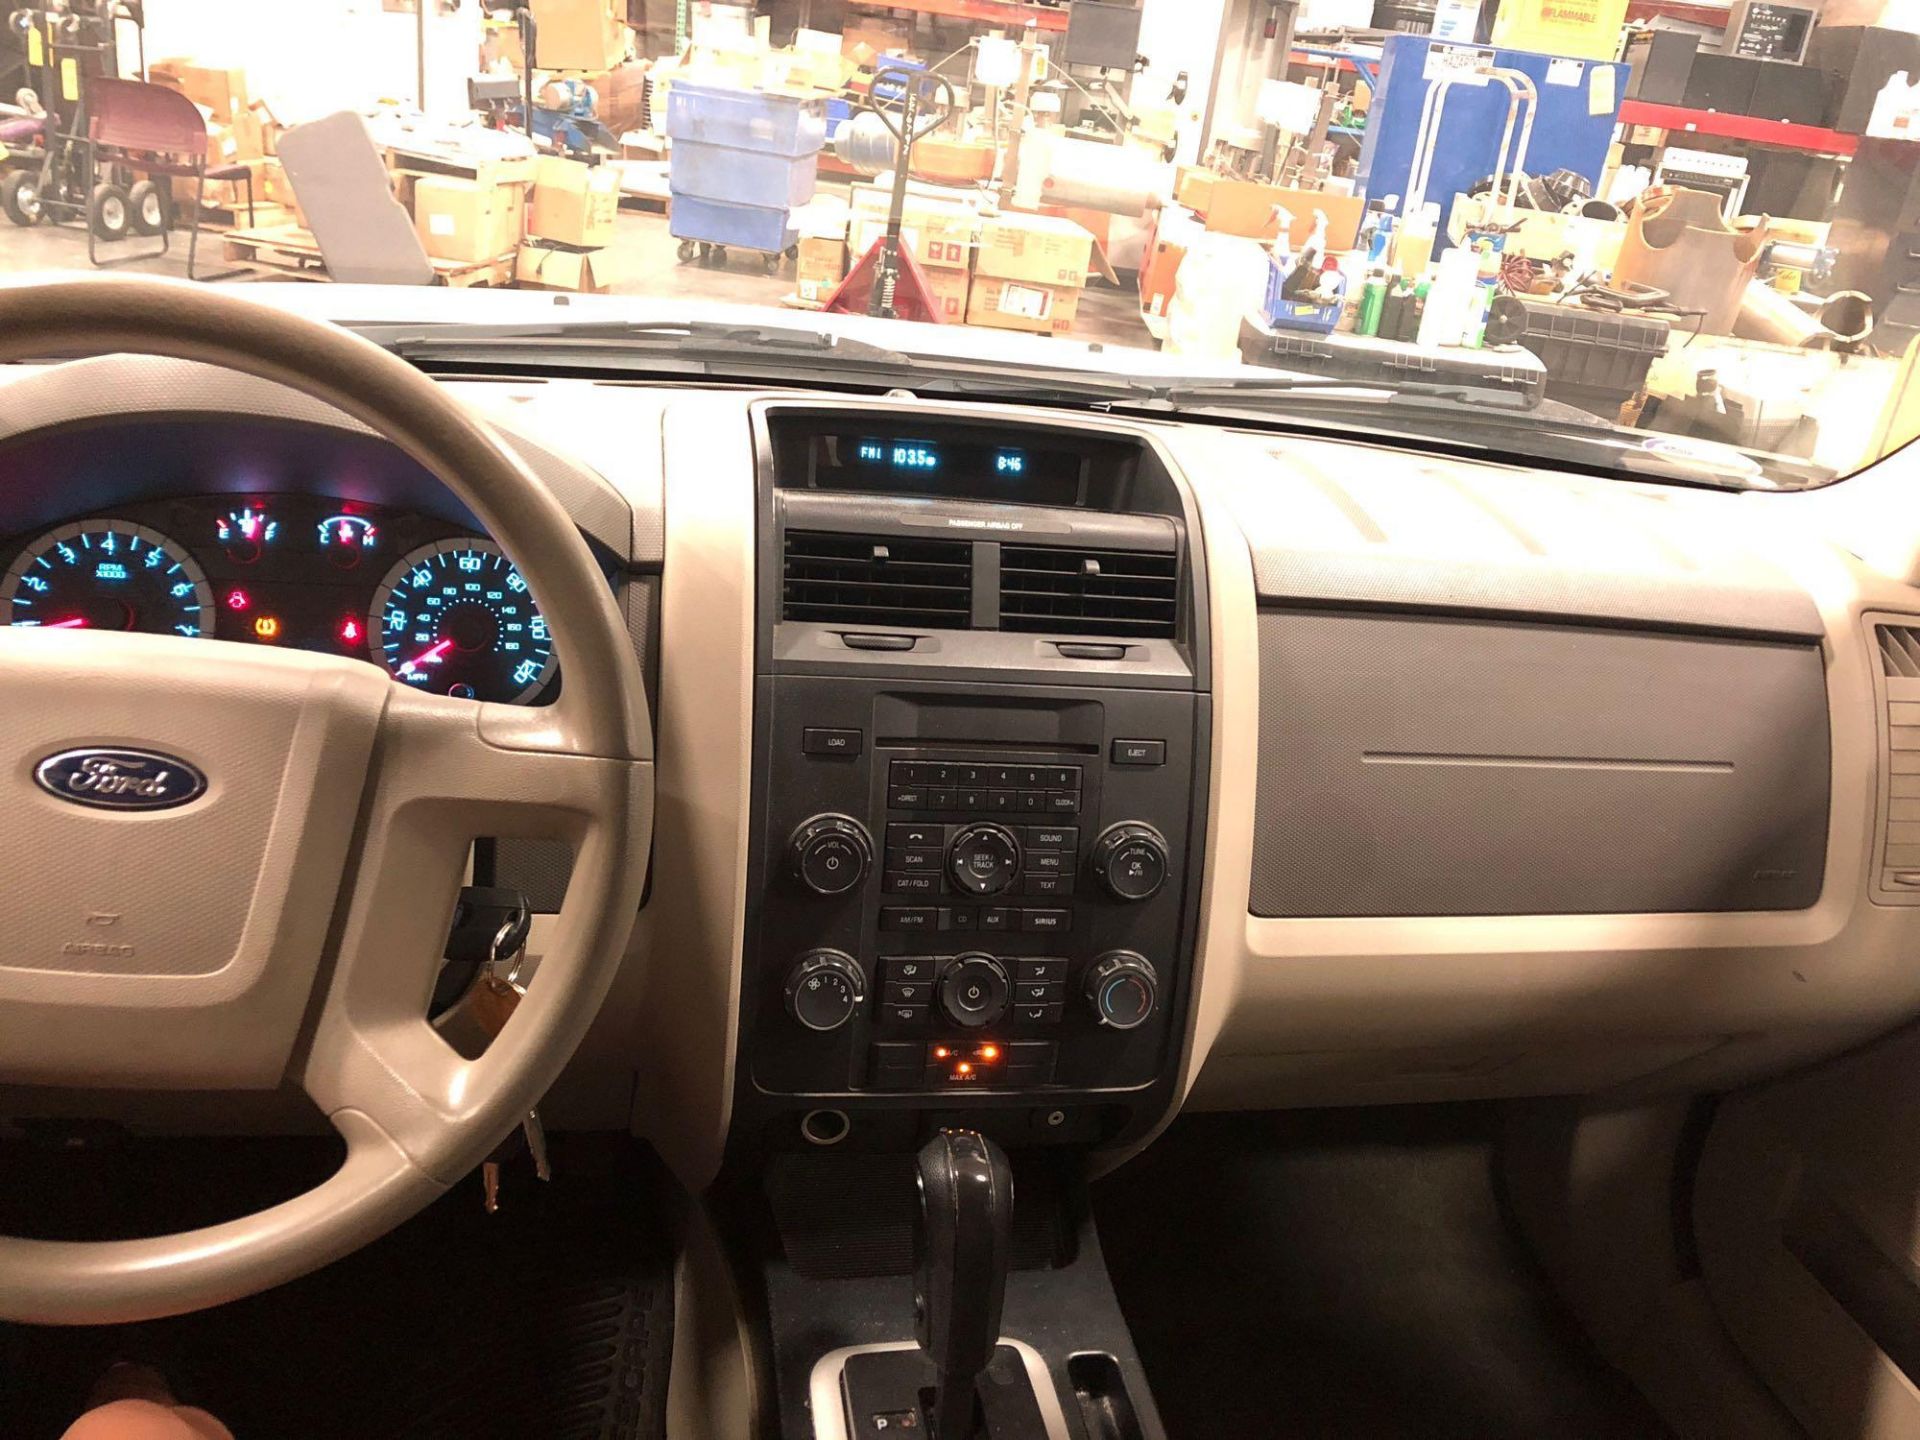 2010 FORD ESCAPE SUV, 4 DOOR, AUTOMATIC TRANSMISSION, RUNS - Image 16 of 17